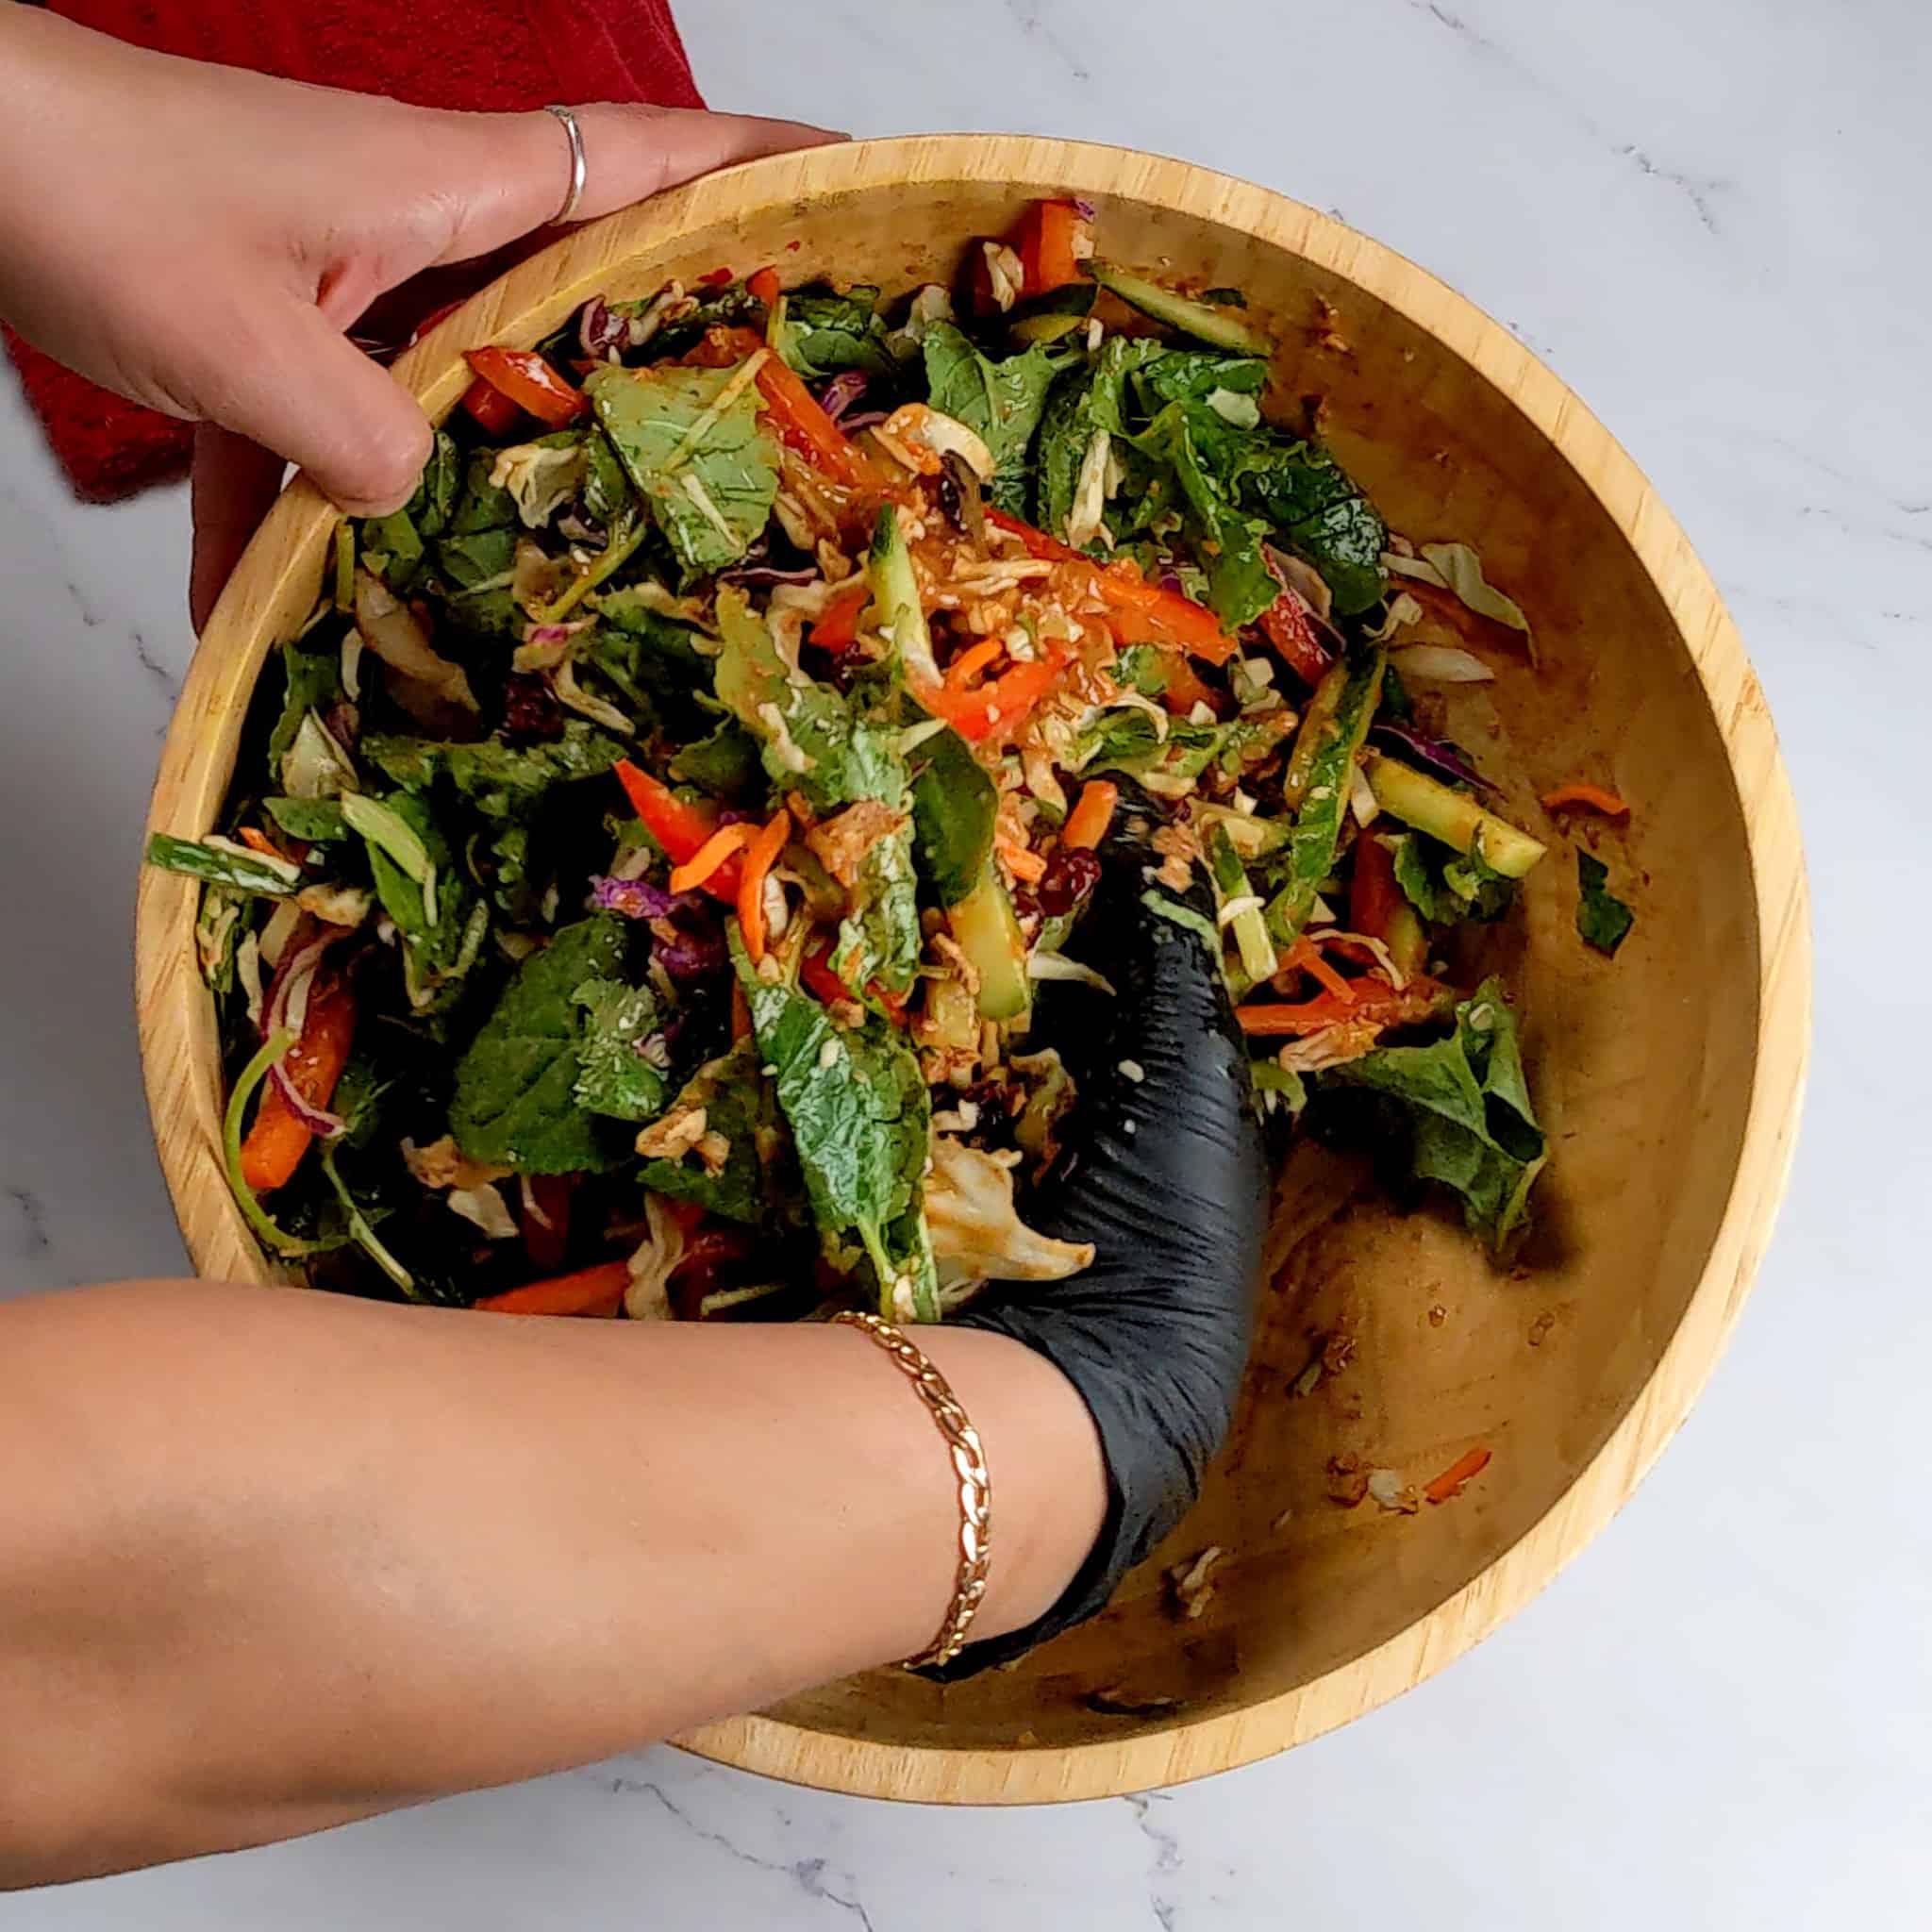 a gloved hand gently mixing the vegetables and greens in the wooden bowl.